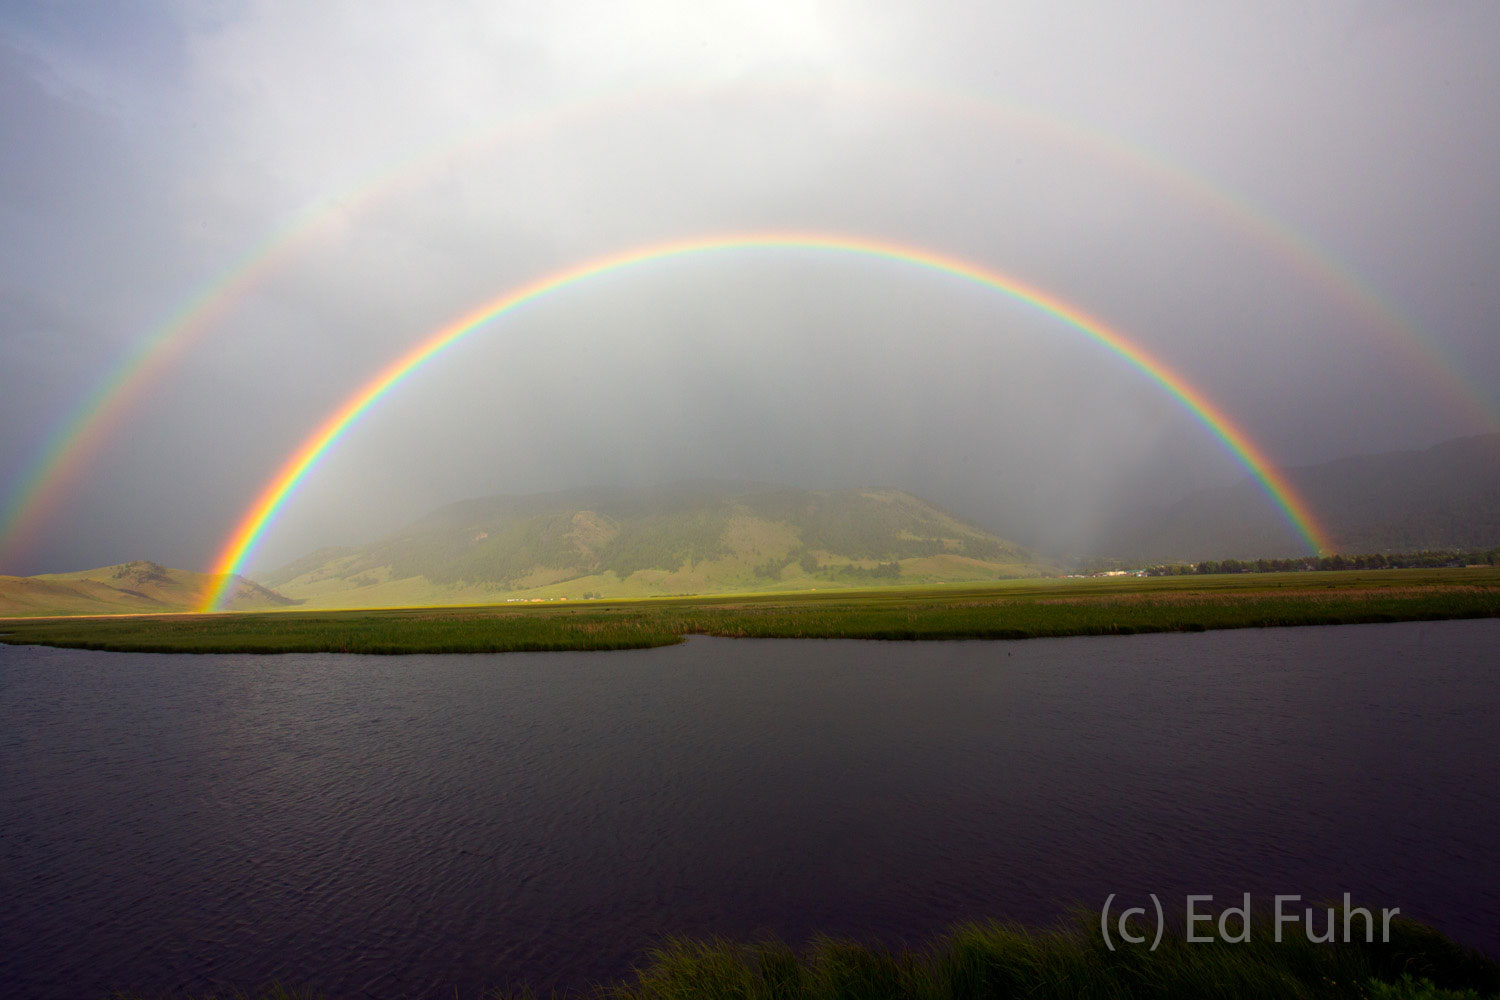 As a summer storm passes, a double rainbow emerges with the promise of better tomorrows.